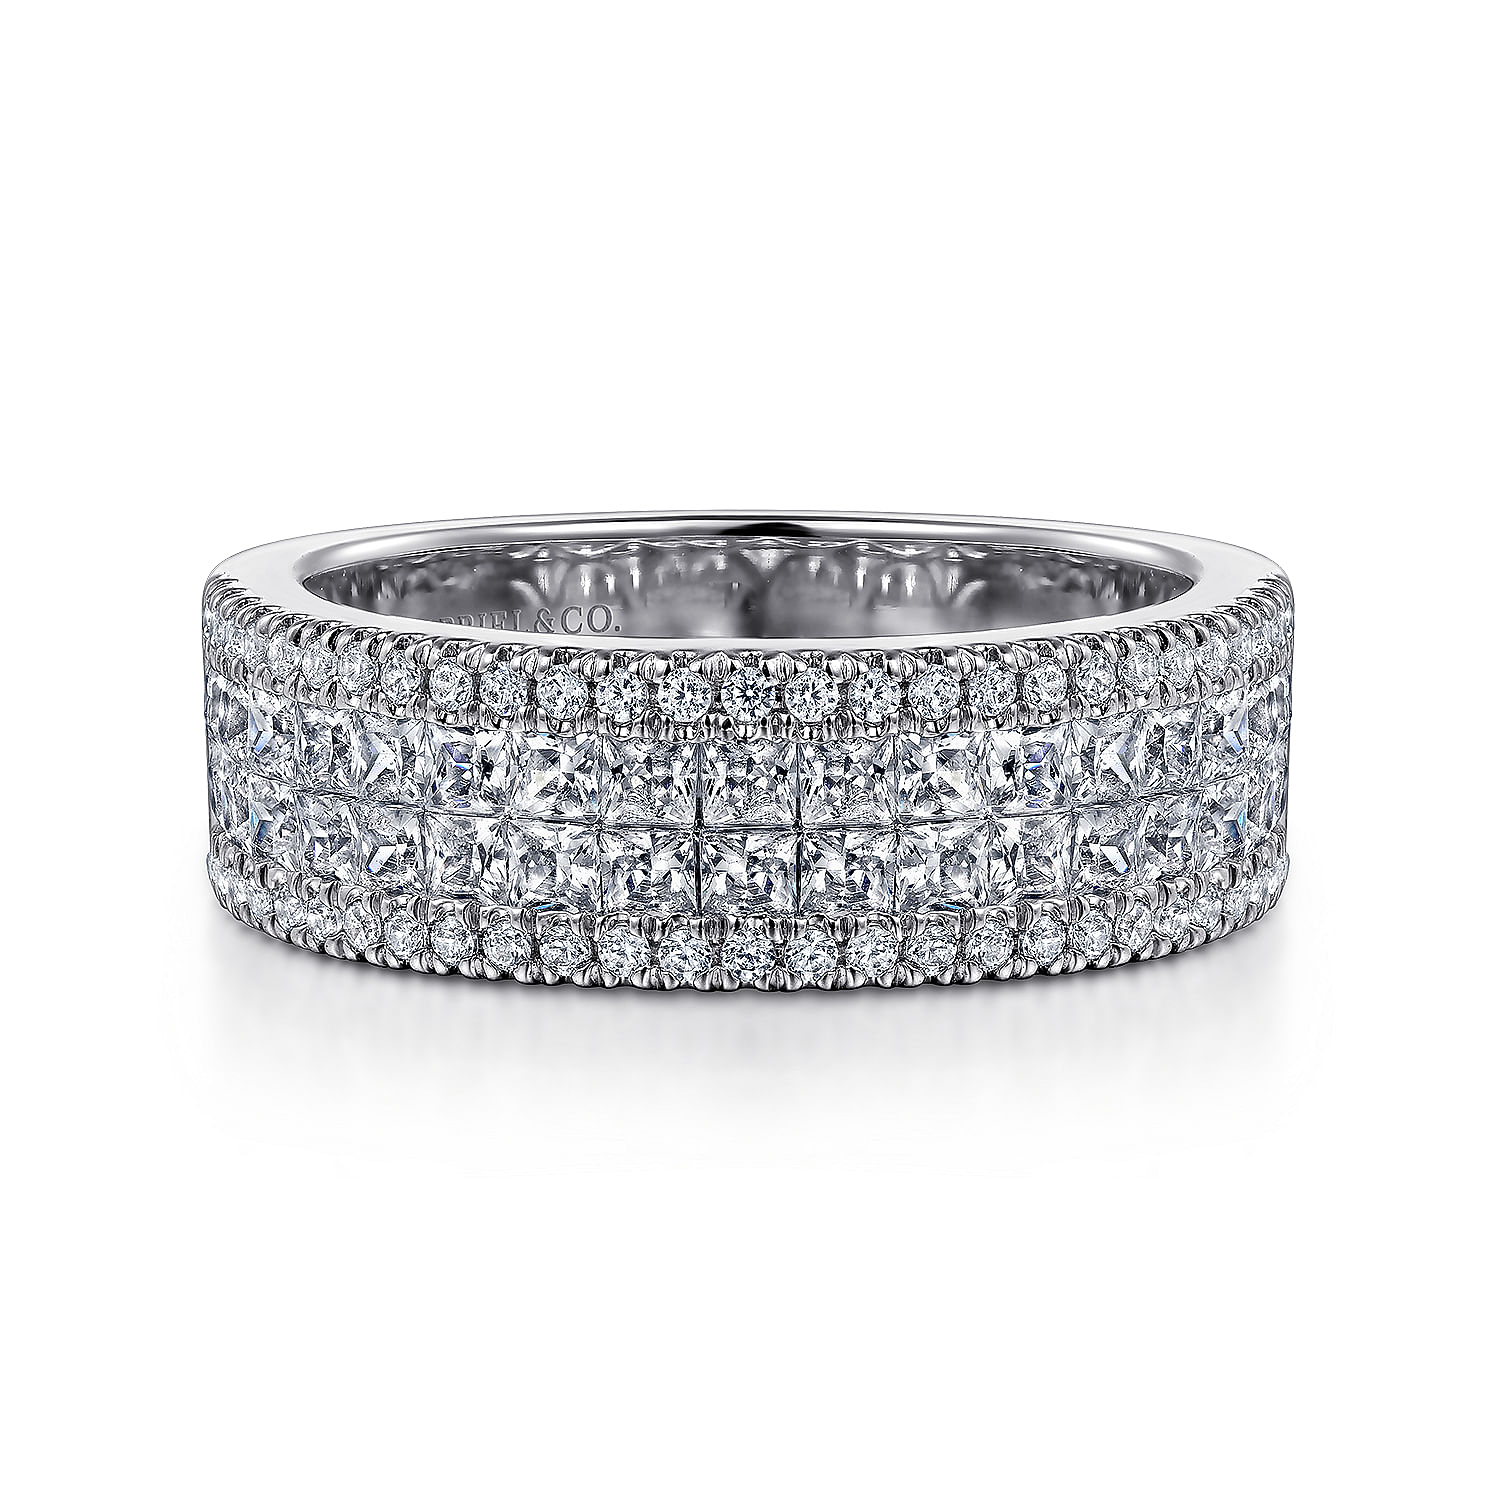 14K White Gold Princess Cut and Round Diamond Wide Band Ring